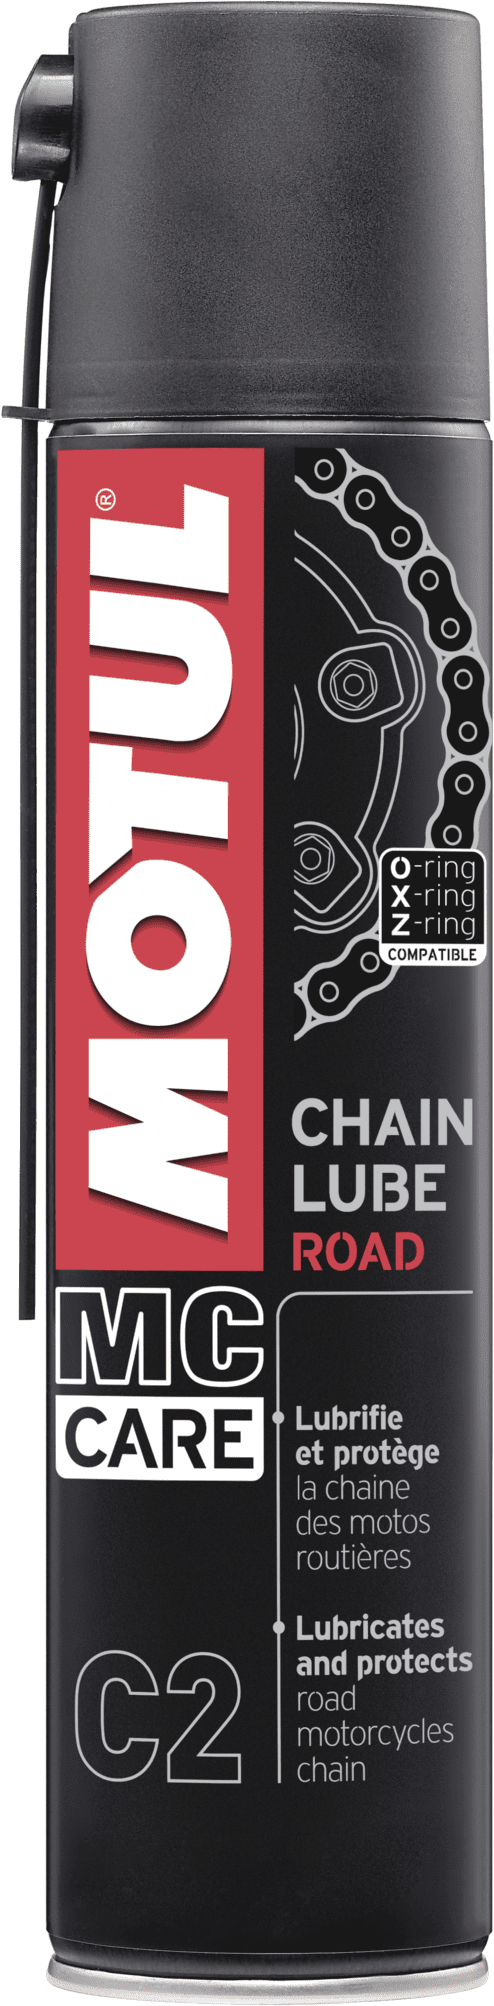 102981-400ML Lubricant for road motorcycle chains.